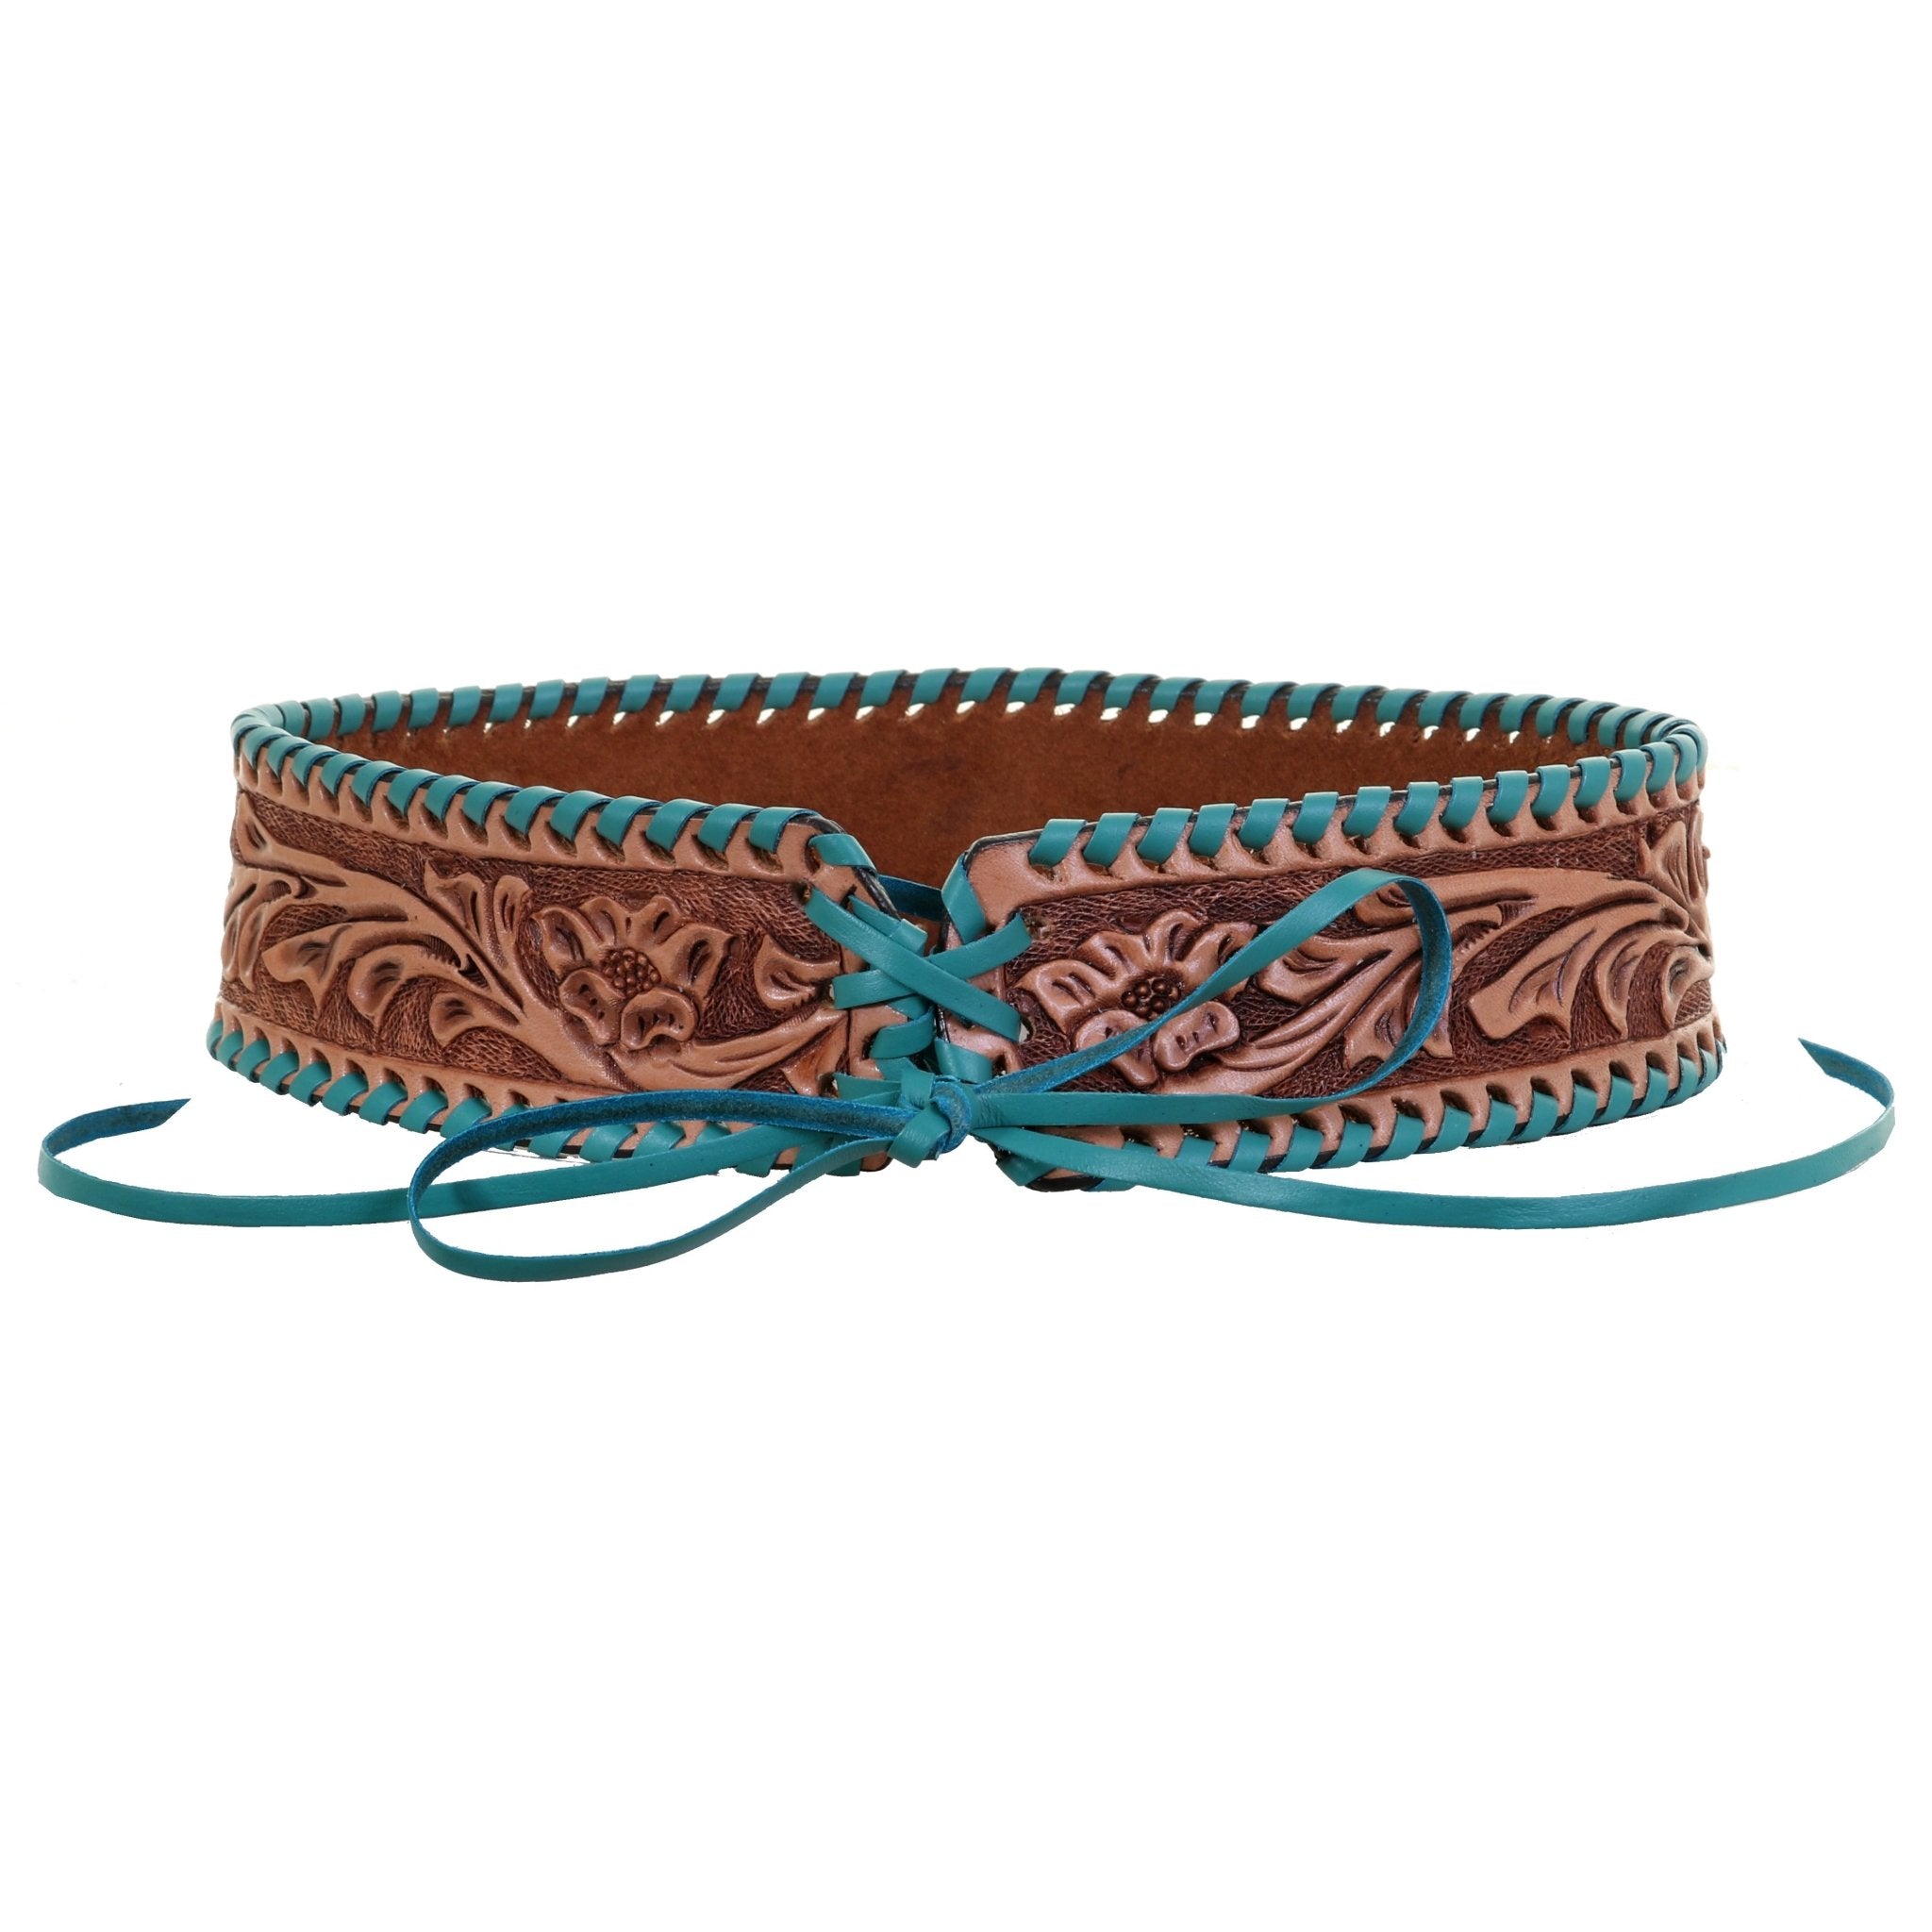 Hat Band Tooled Leather Western Floral Design. -   Cappelli cowgirl,  Utensili di cuoio, Design floreale